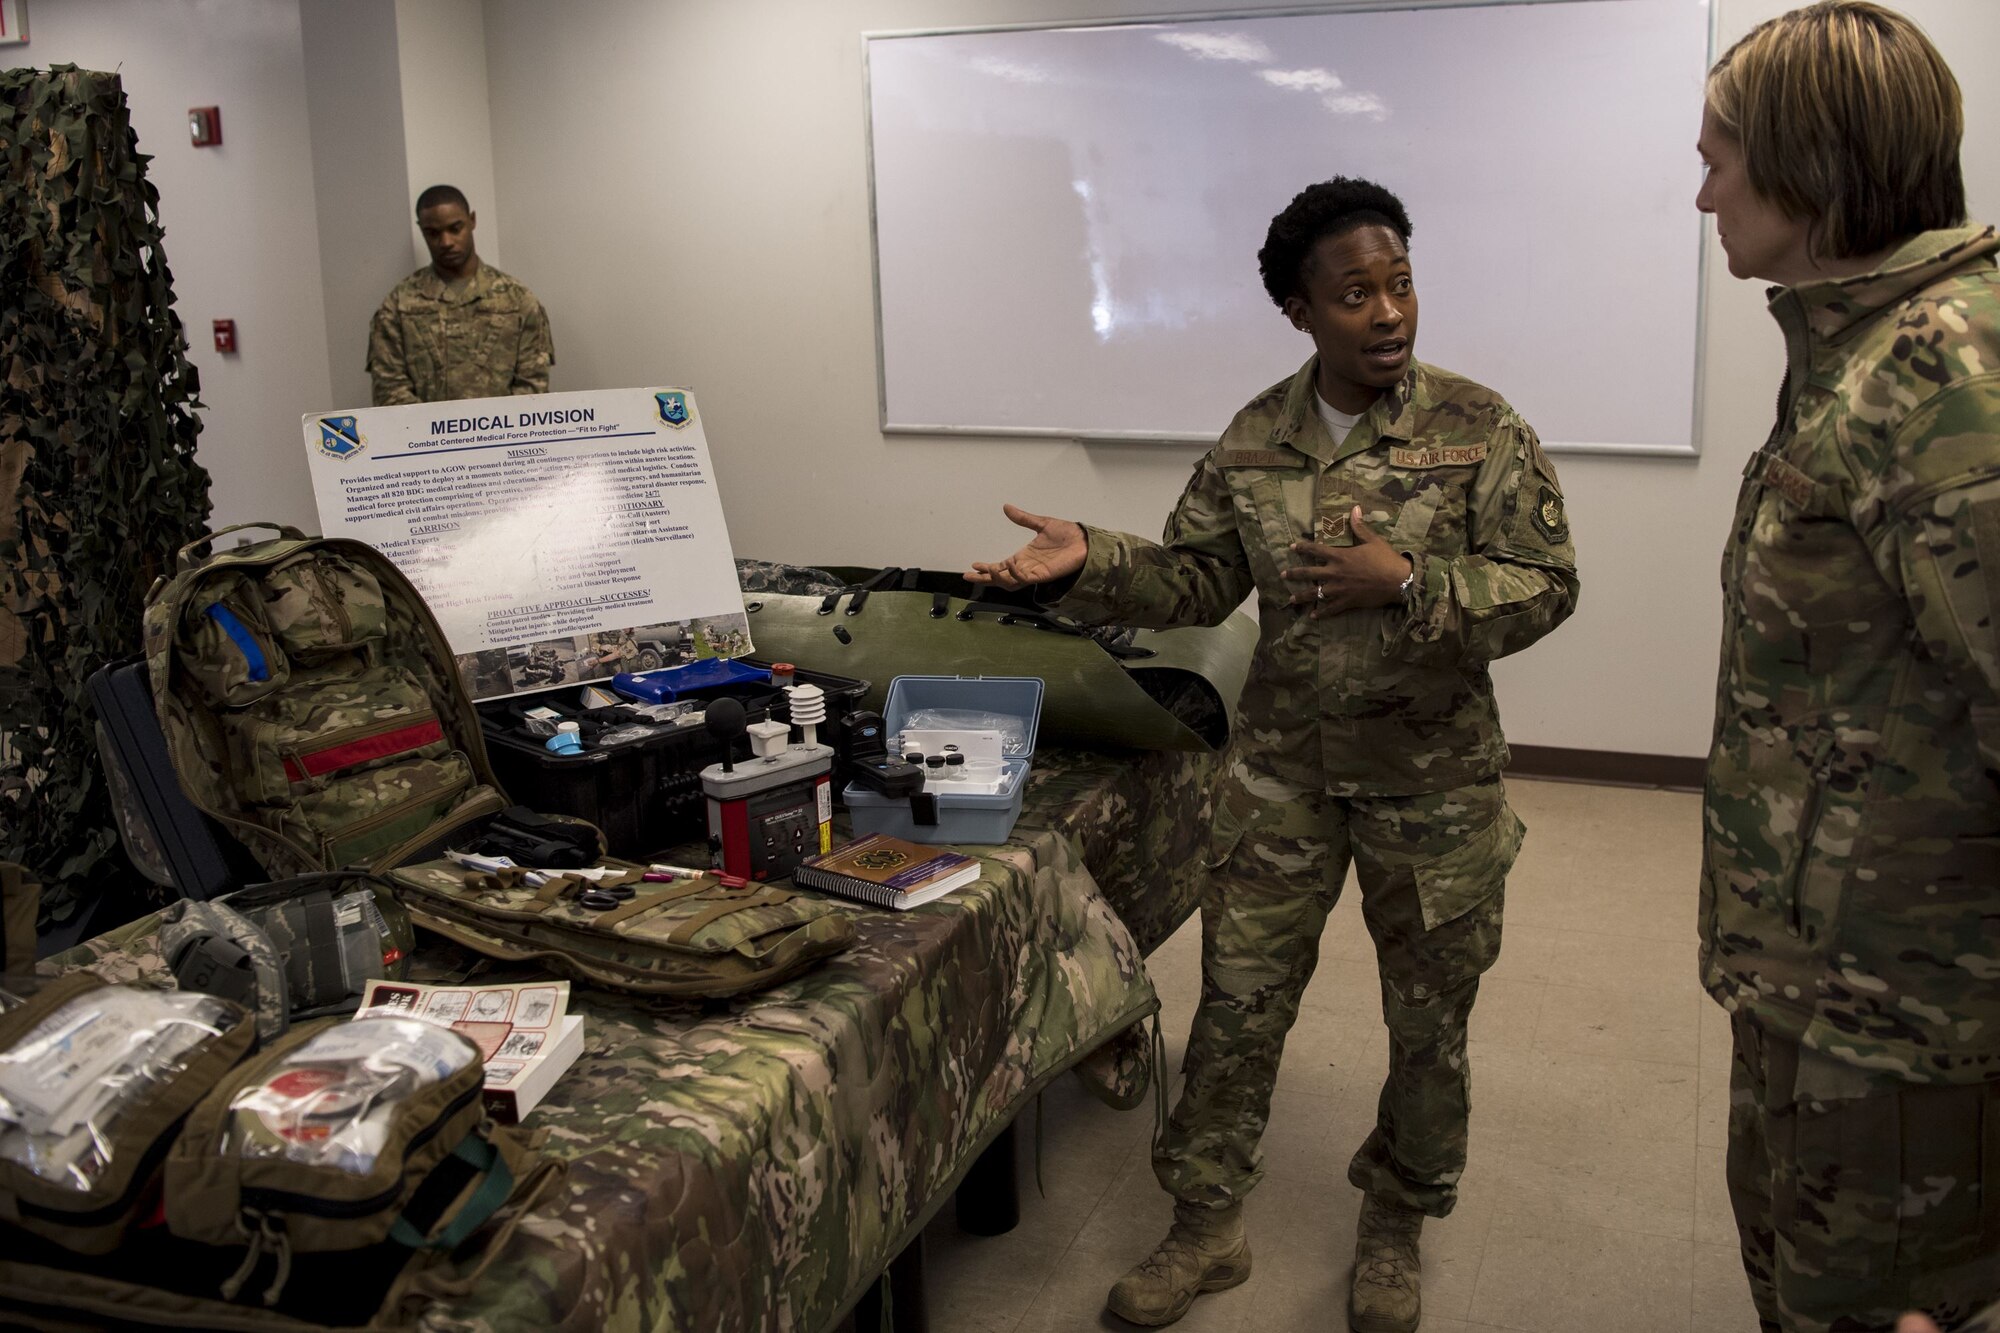 Tech. Sgt. Leticia Brazil, 823d Base Defense Squadron independent duty medical technician, displays her equipment and describes her mission to Col. Jennifer Short, 23d Wing commander, during a capabilities demonstration, Feb. 5, 2018, at Moody Air Force Base, Ga. The immersion was designed to give the 23d Wing’s leadership a better understanding of the 820th Base Defense Group’s mission, capabilities and training needs. (U.S. Air Force photo by Senior Airman Daniel Snider)